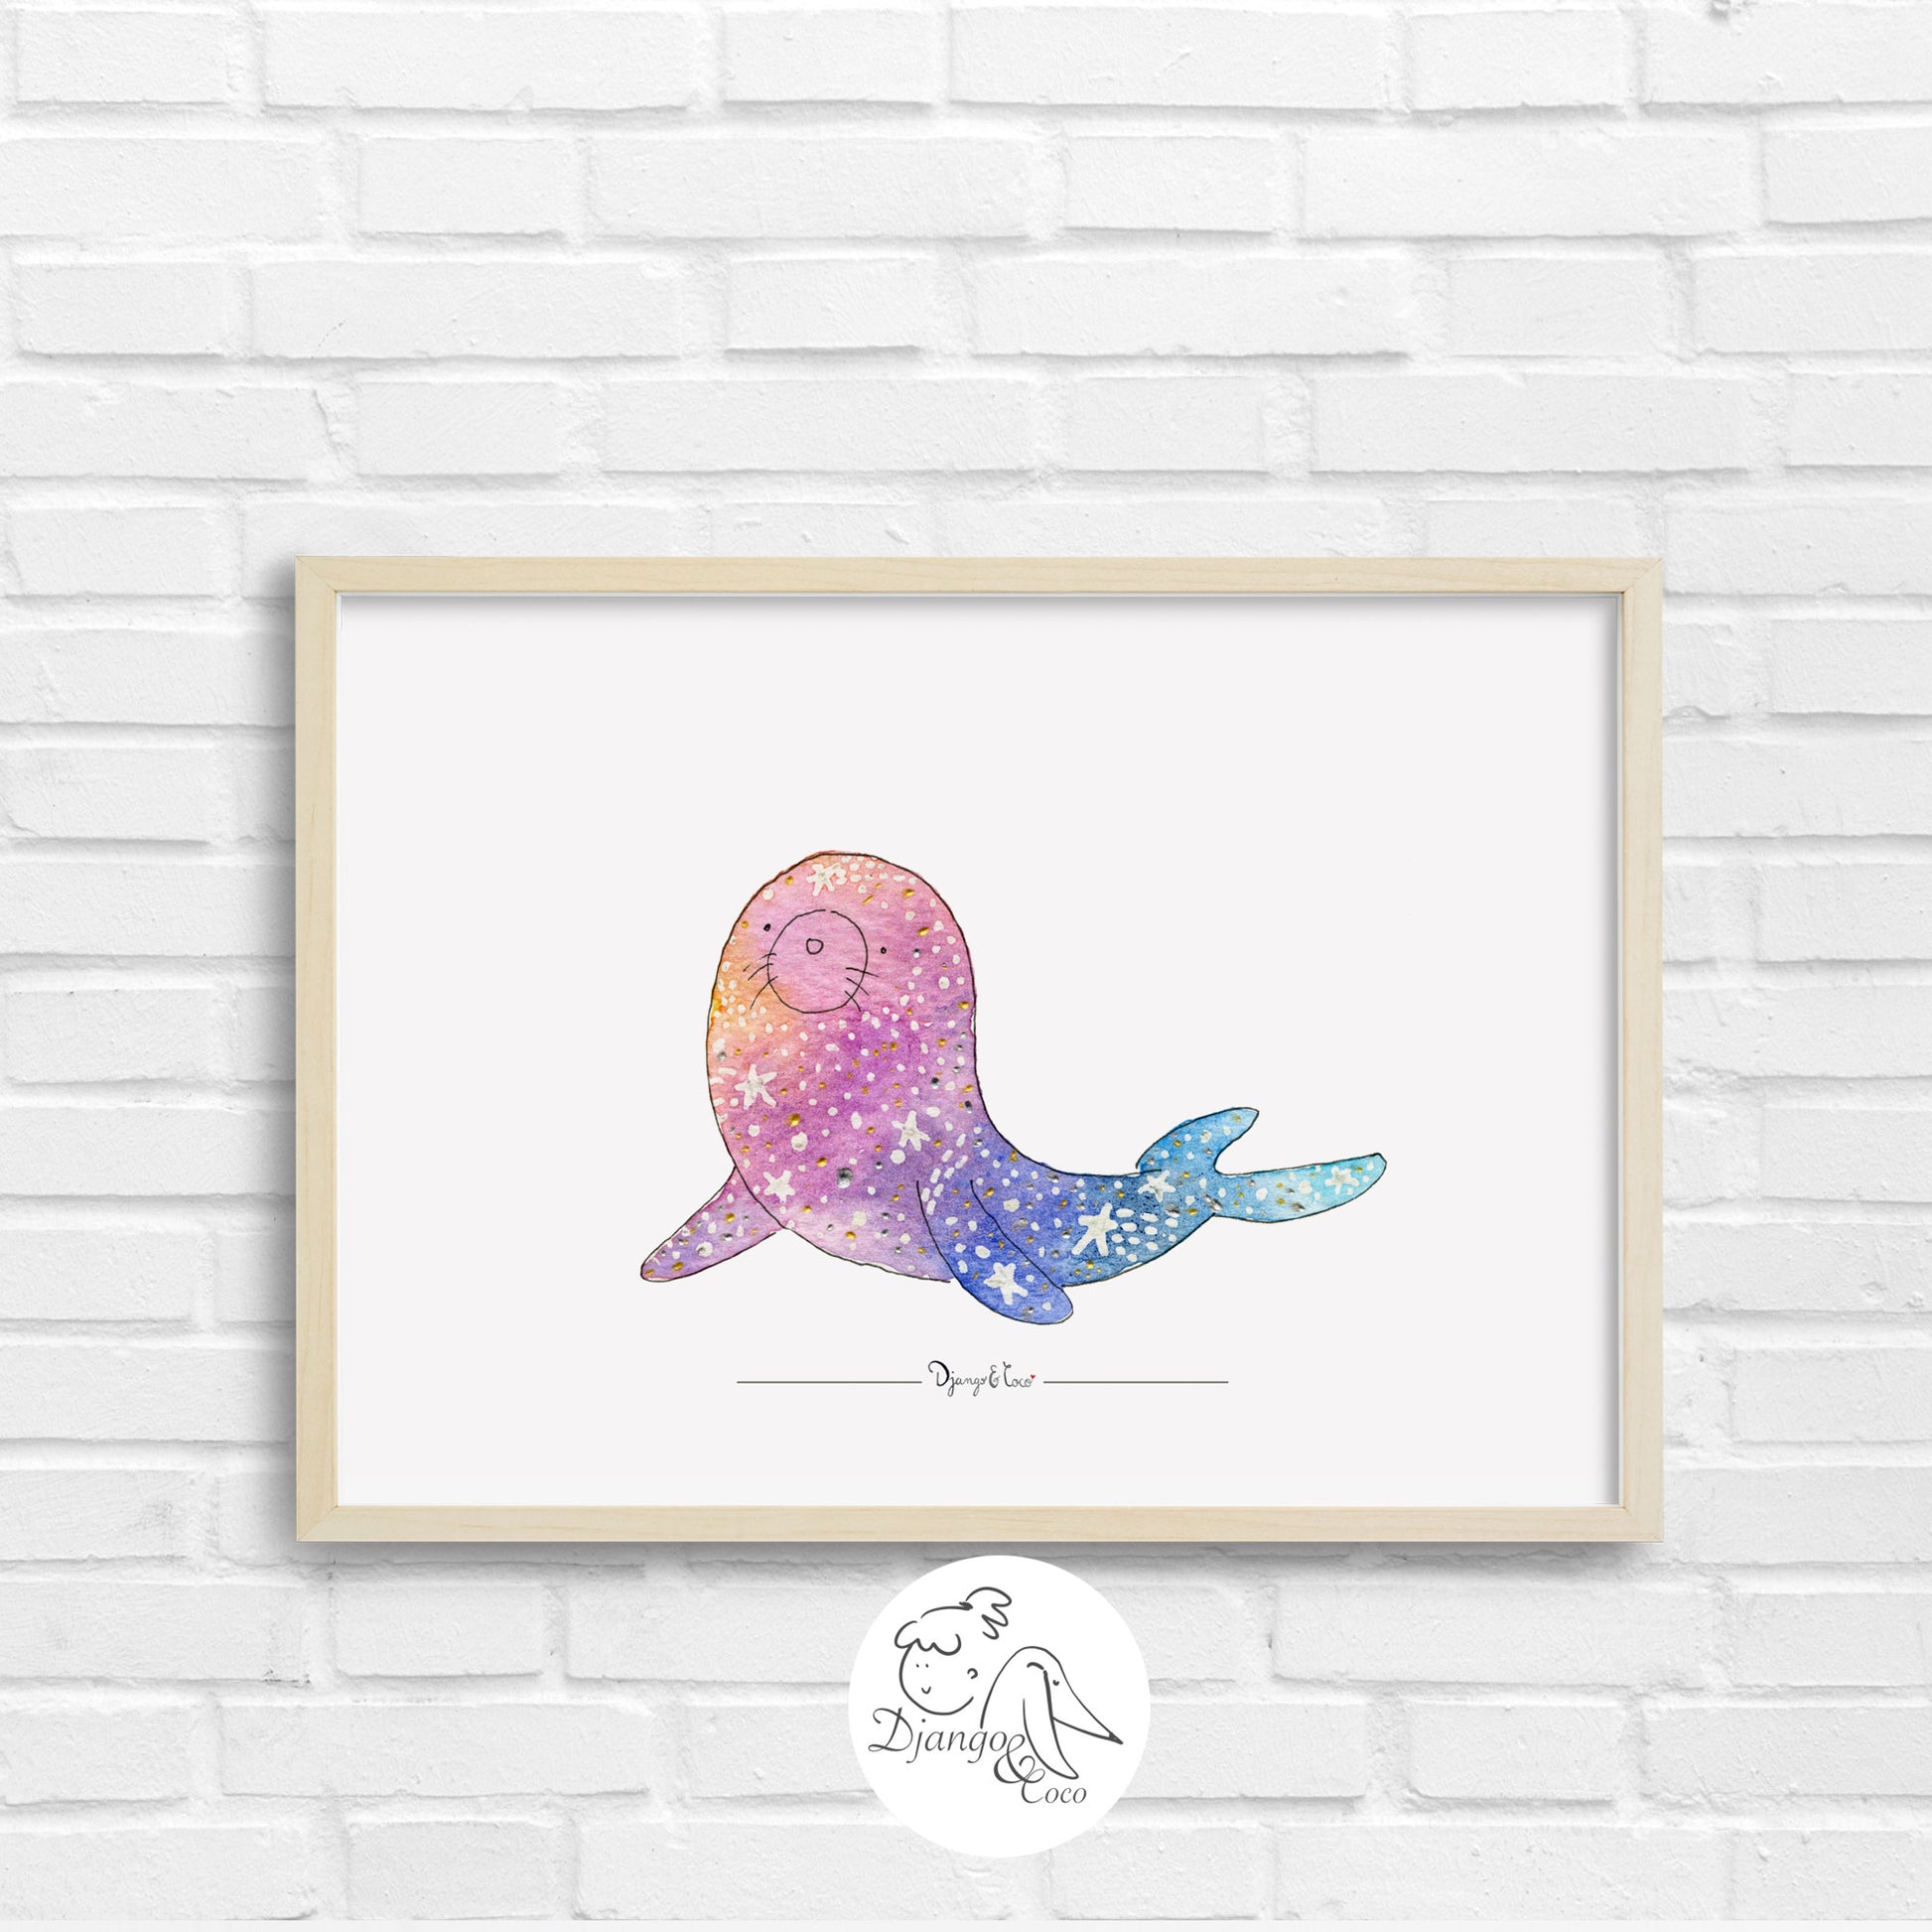 Seal illustration watercolor in a frame